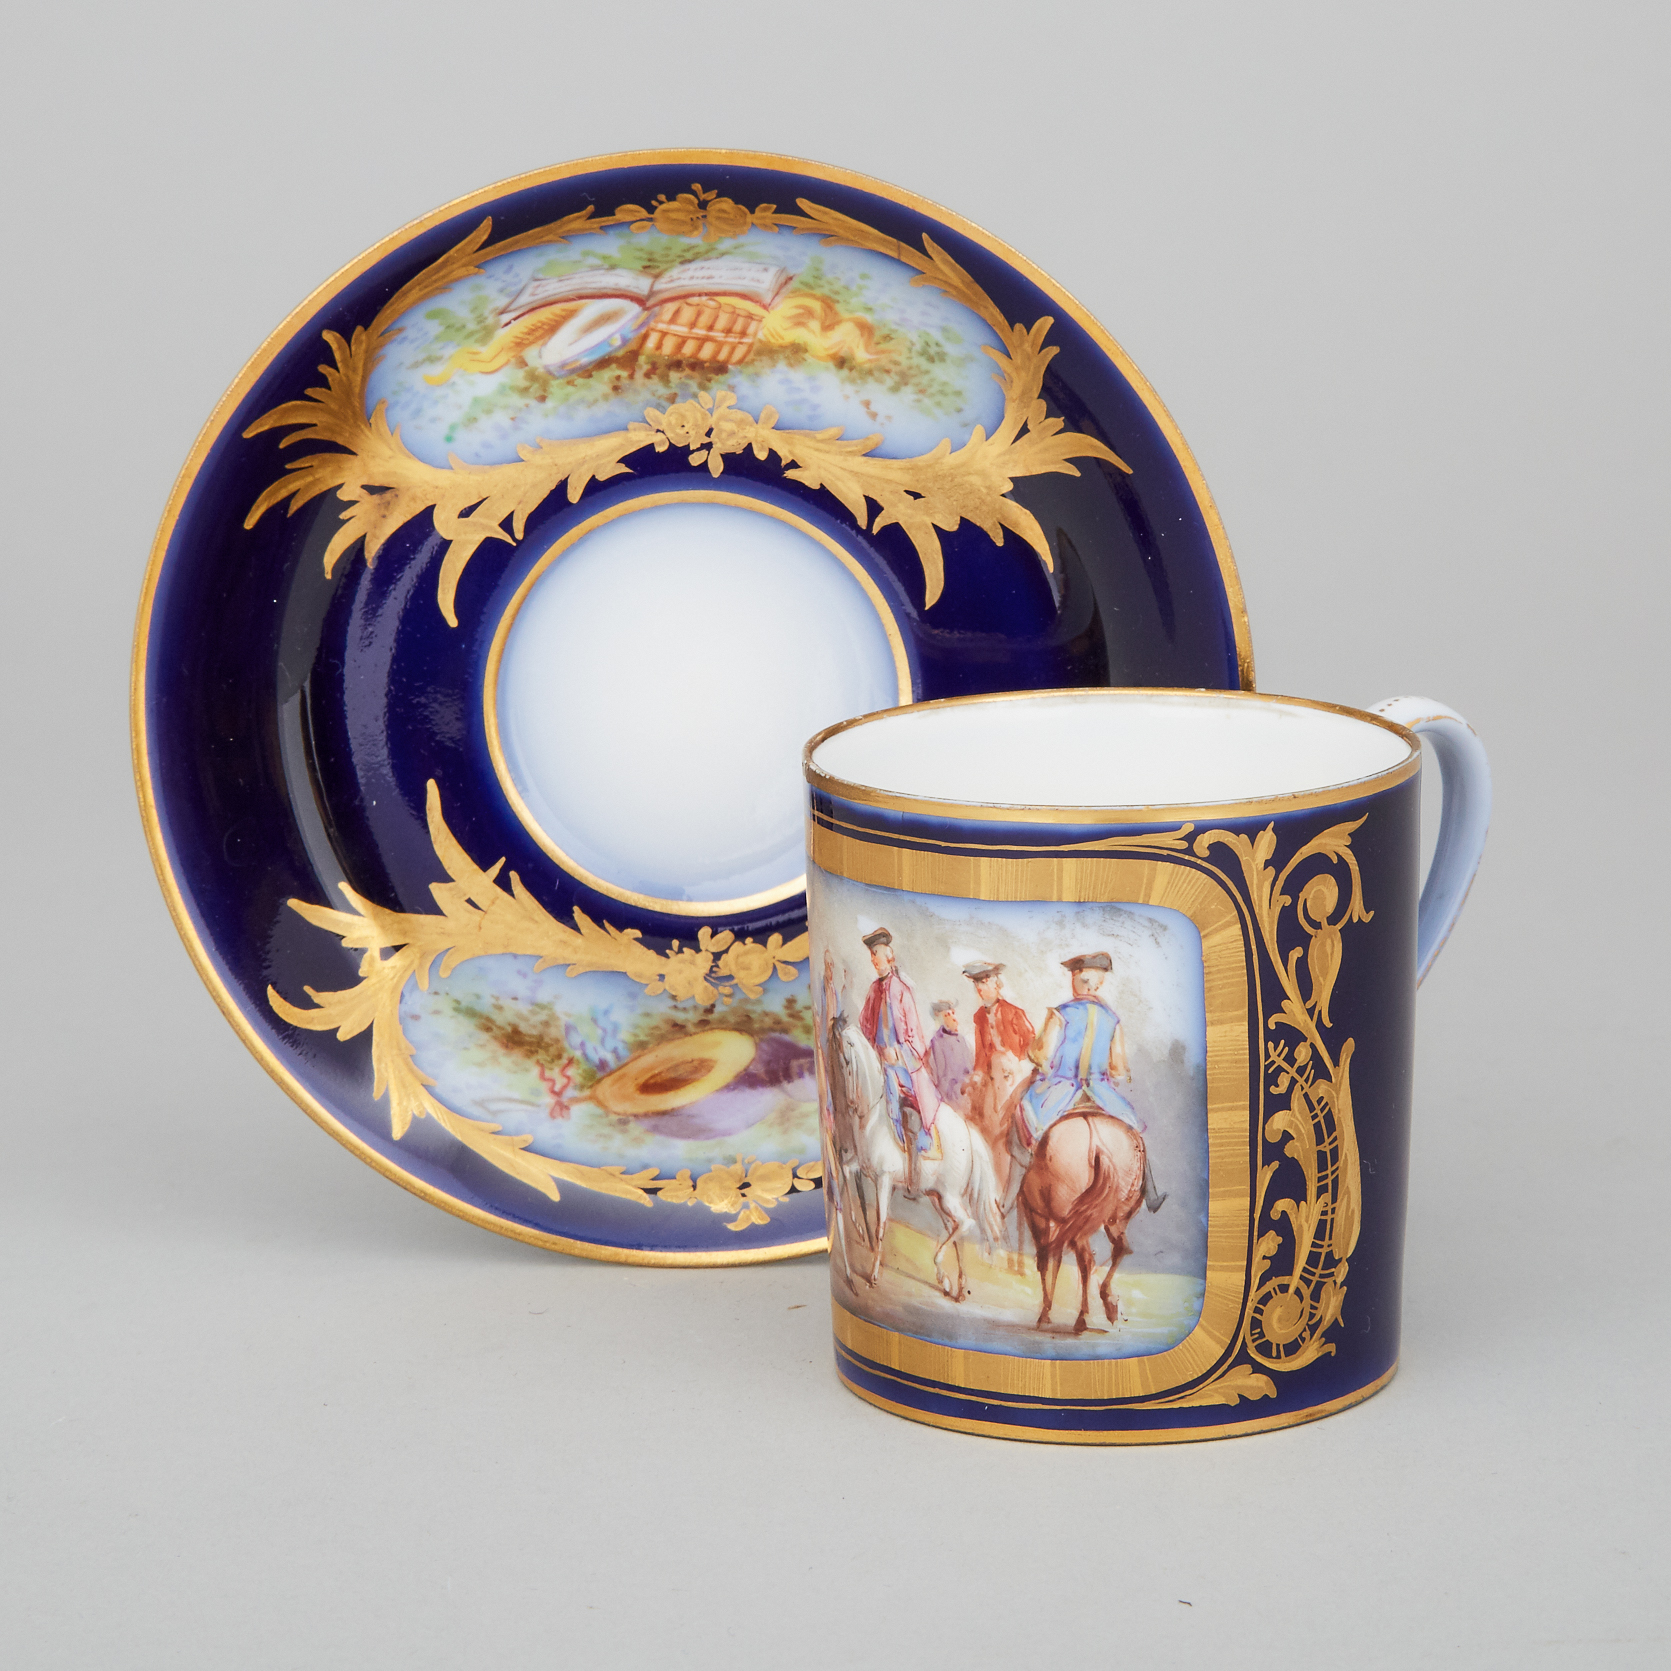 'Sèvres' Blue Ground Coffee Can and a Saucer, 19th century